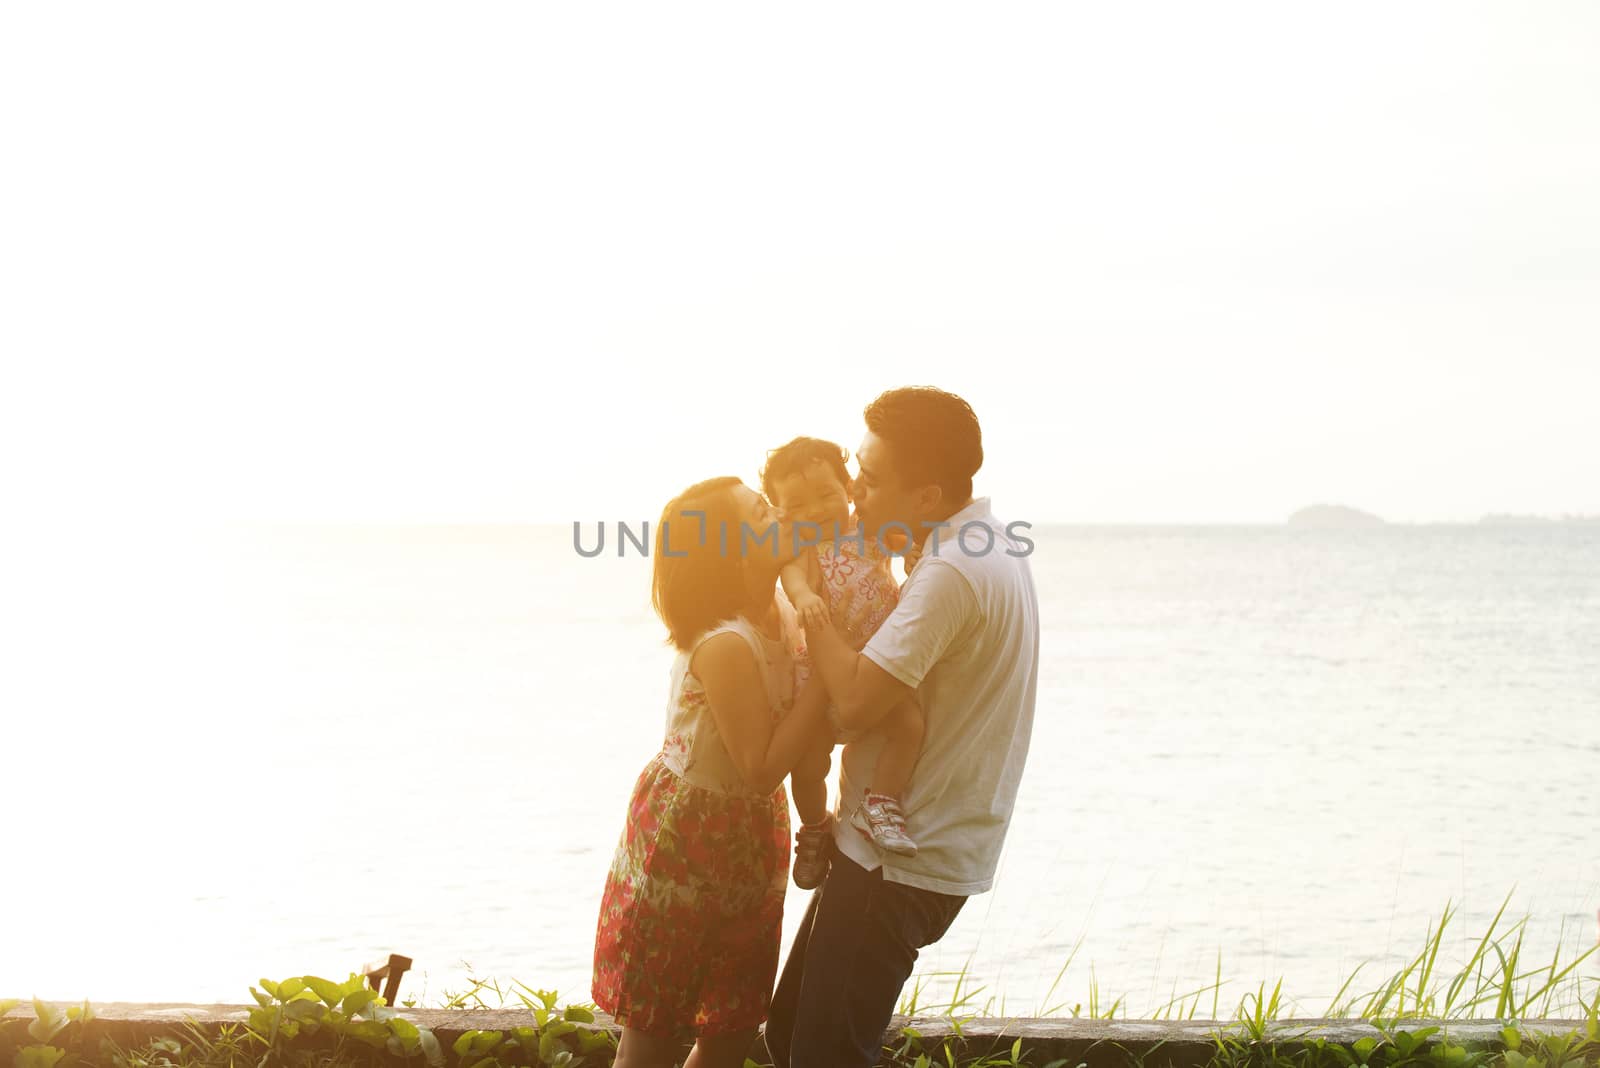 Happy family enjoying outdoor activity together, standing on coastline in beautiful sunset during holiday vacations.